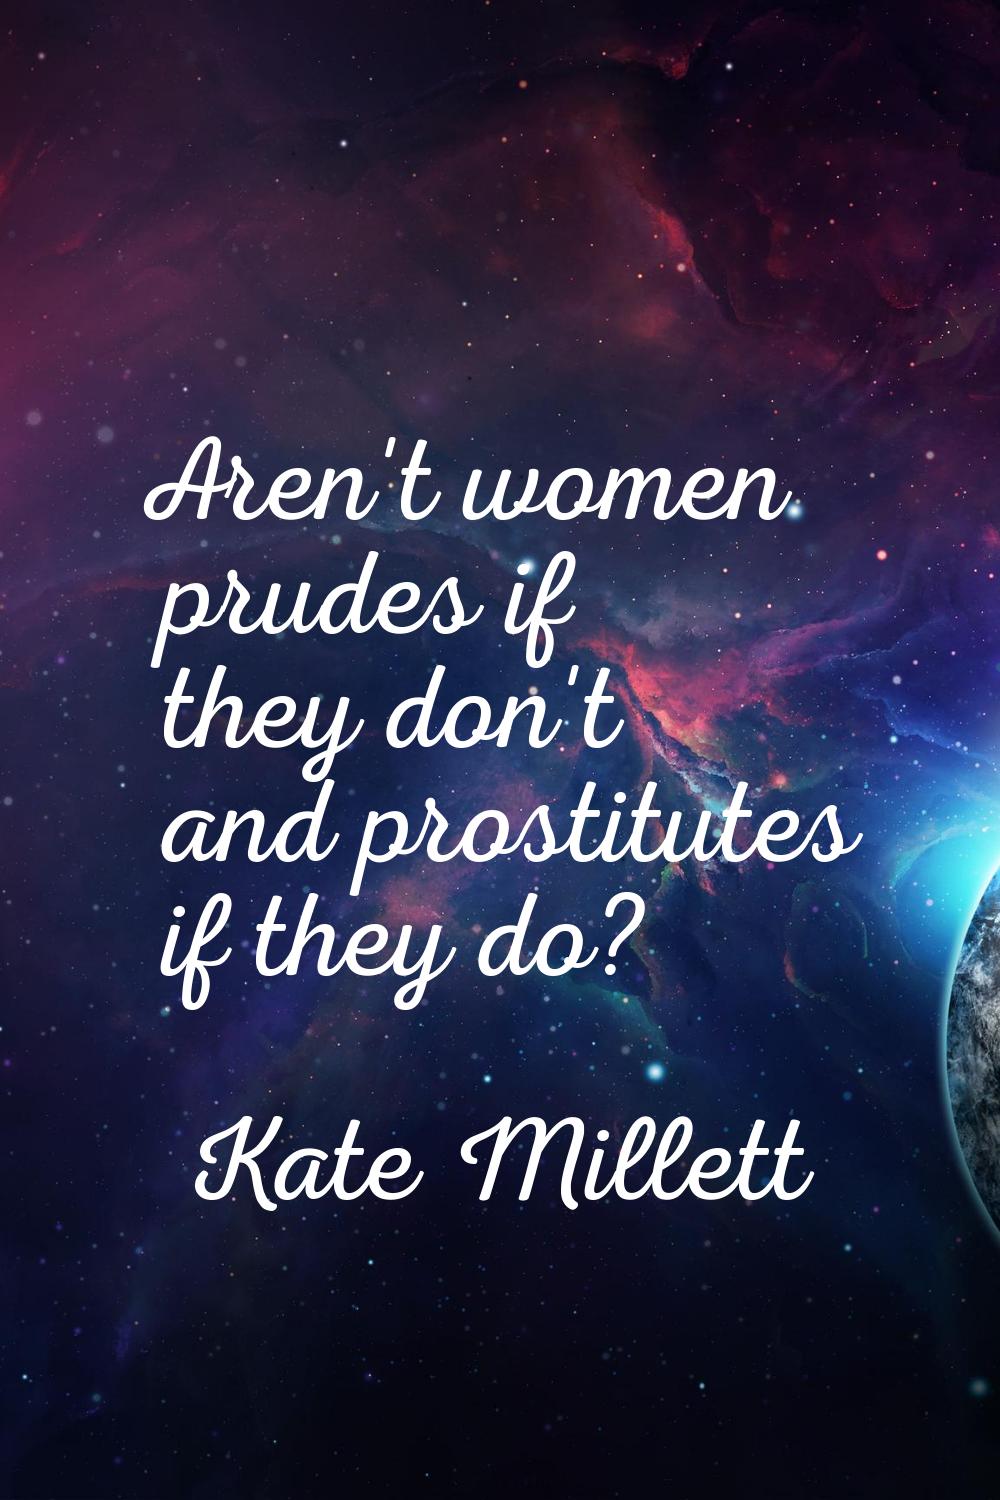 Aren't women prudes if they don't and prostitutes if they do?